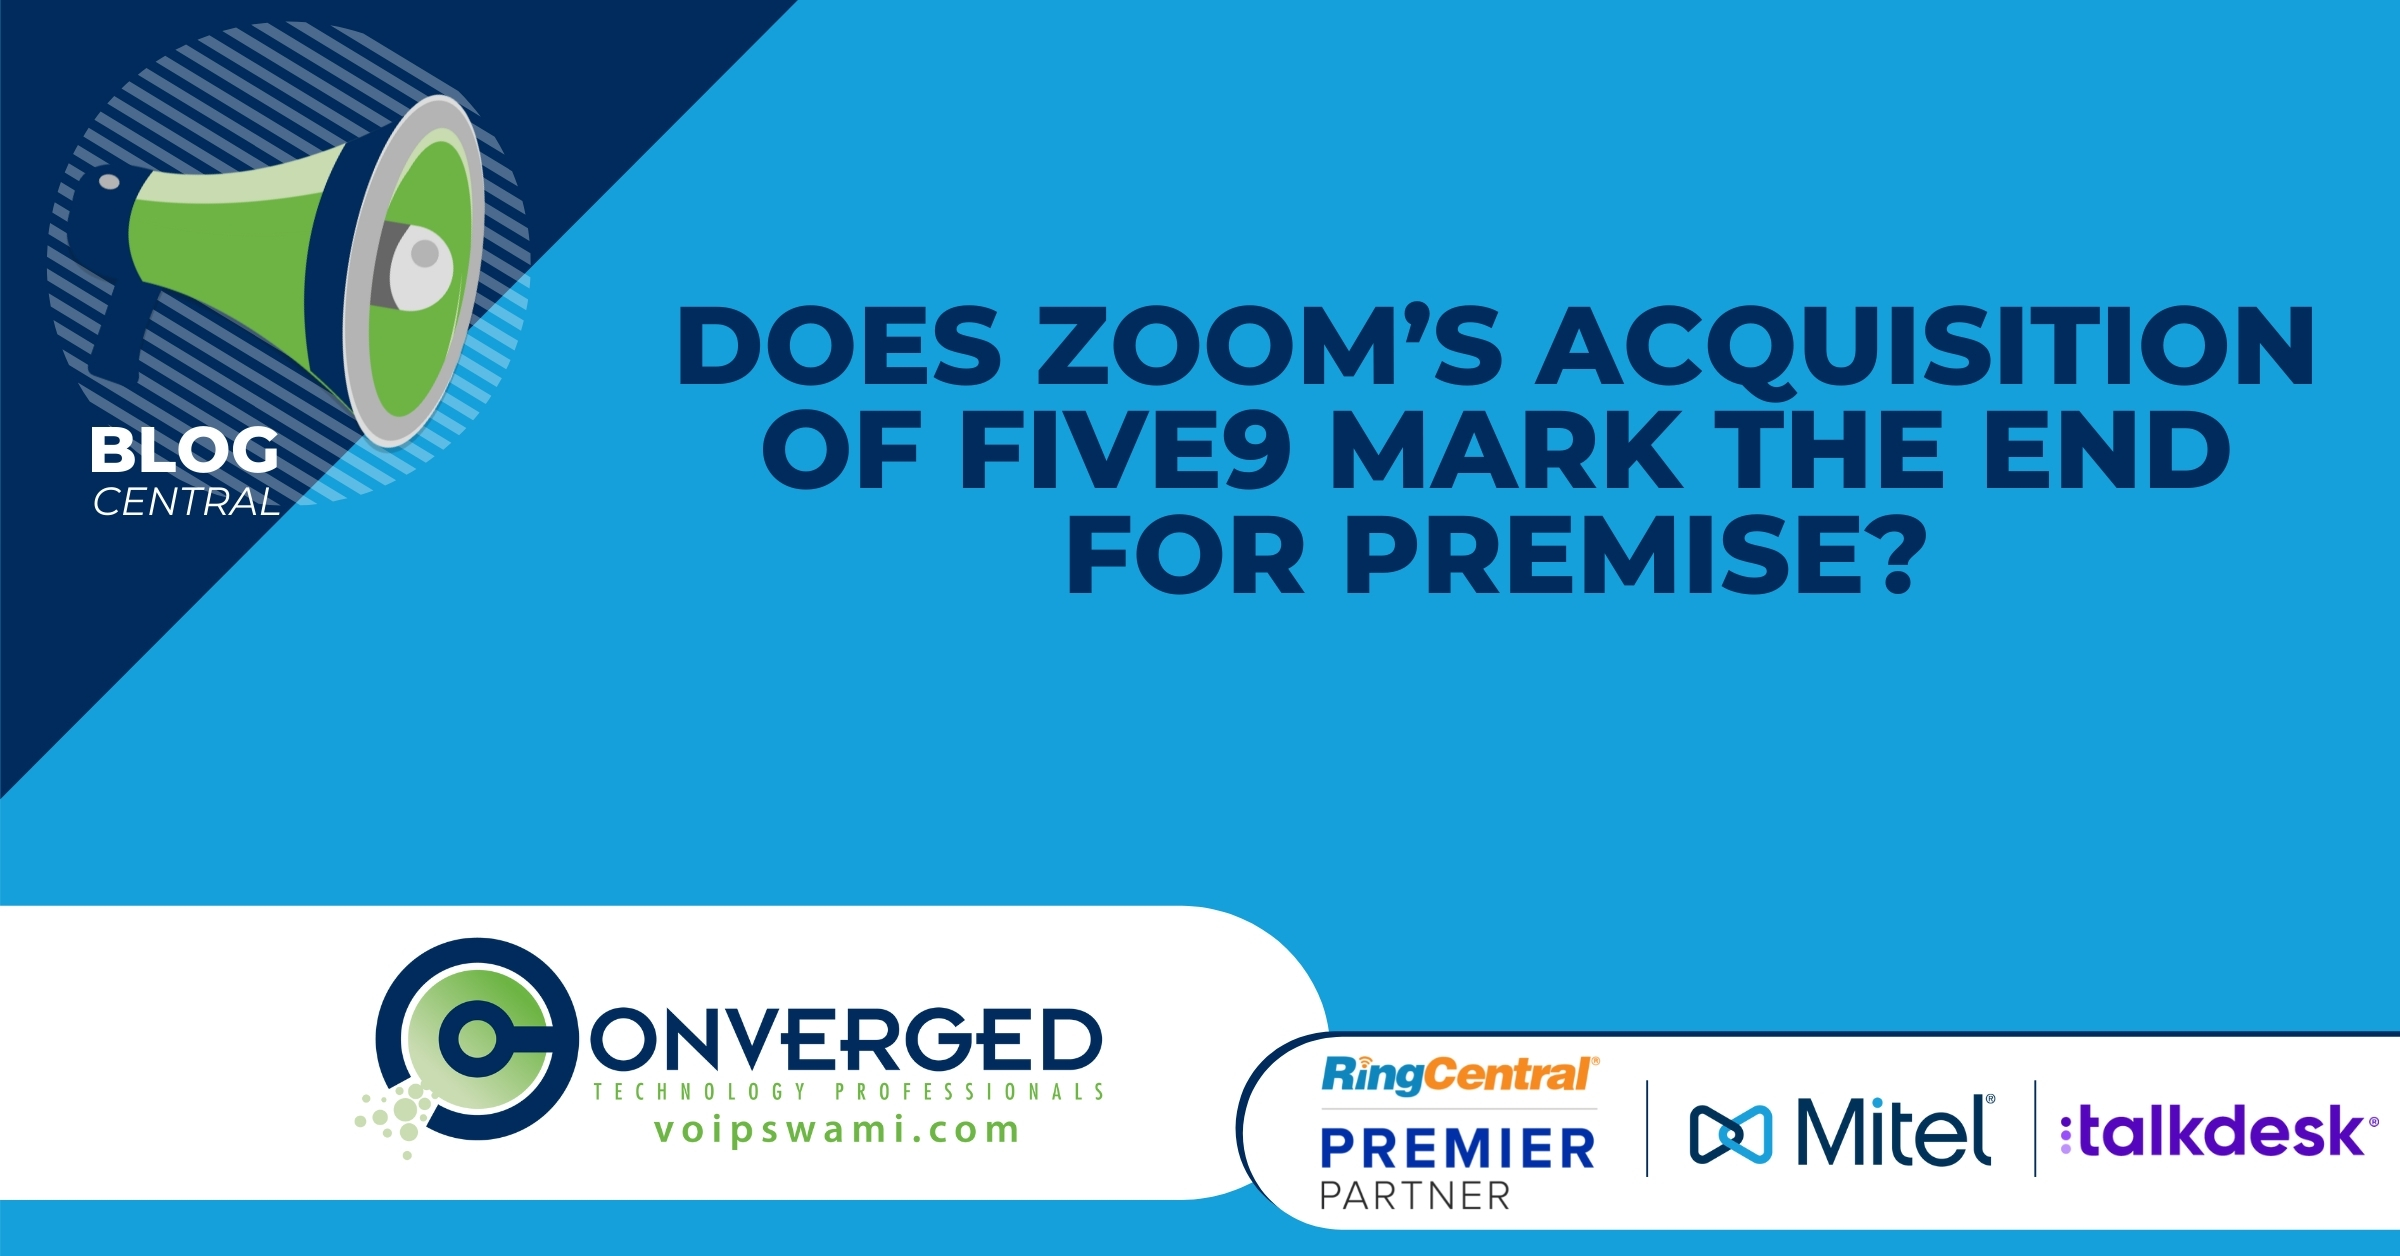 Zoom Acquires Five9's to Shake Up the CCaaS, UCaaS, and Survivability of Premise Conversation